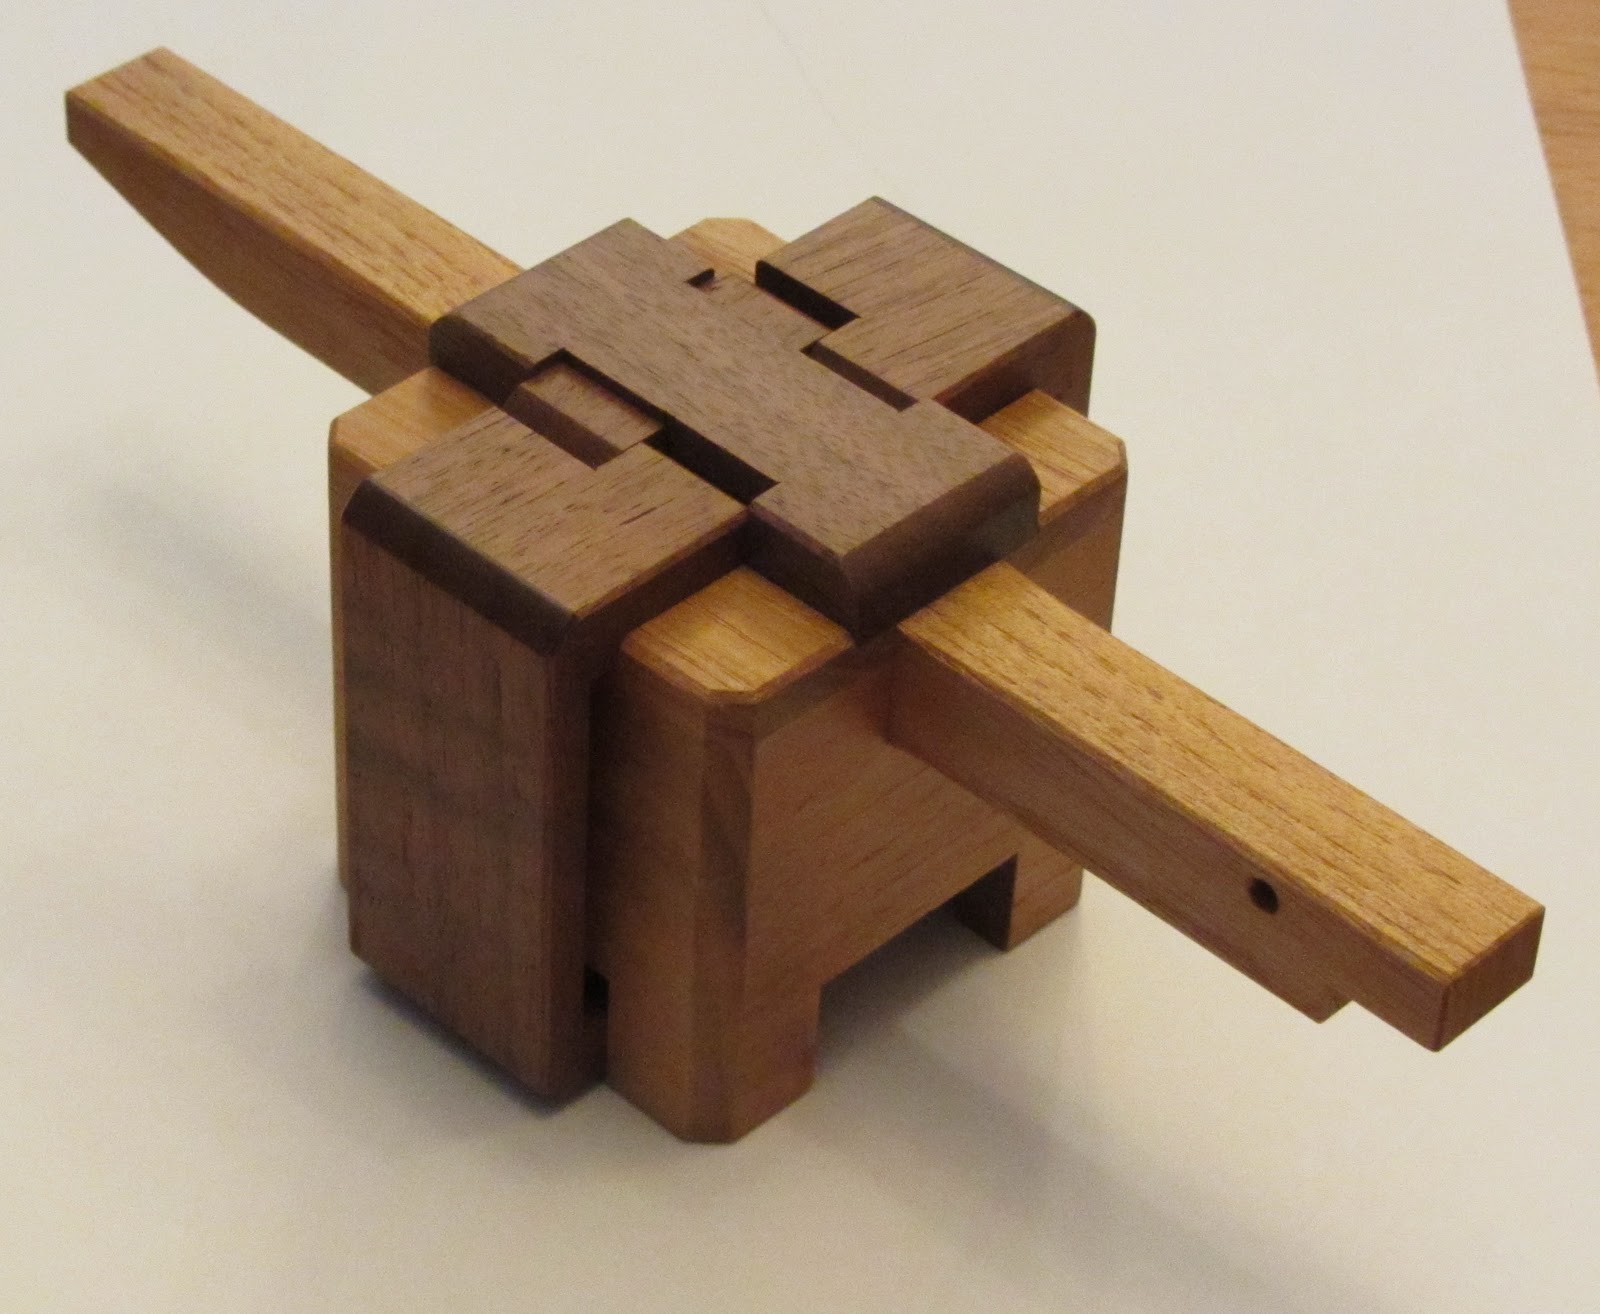 Peaks and Points: Japanese Puzzle Boxes